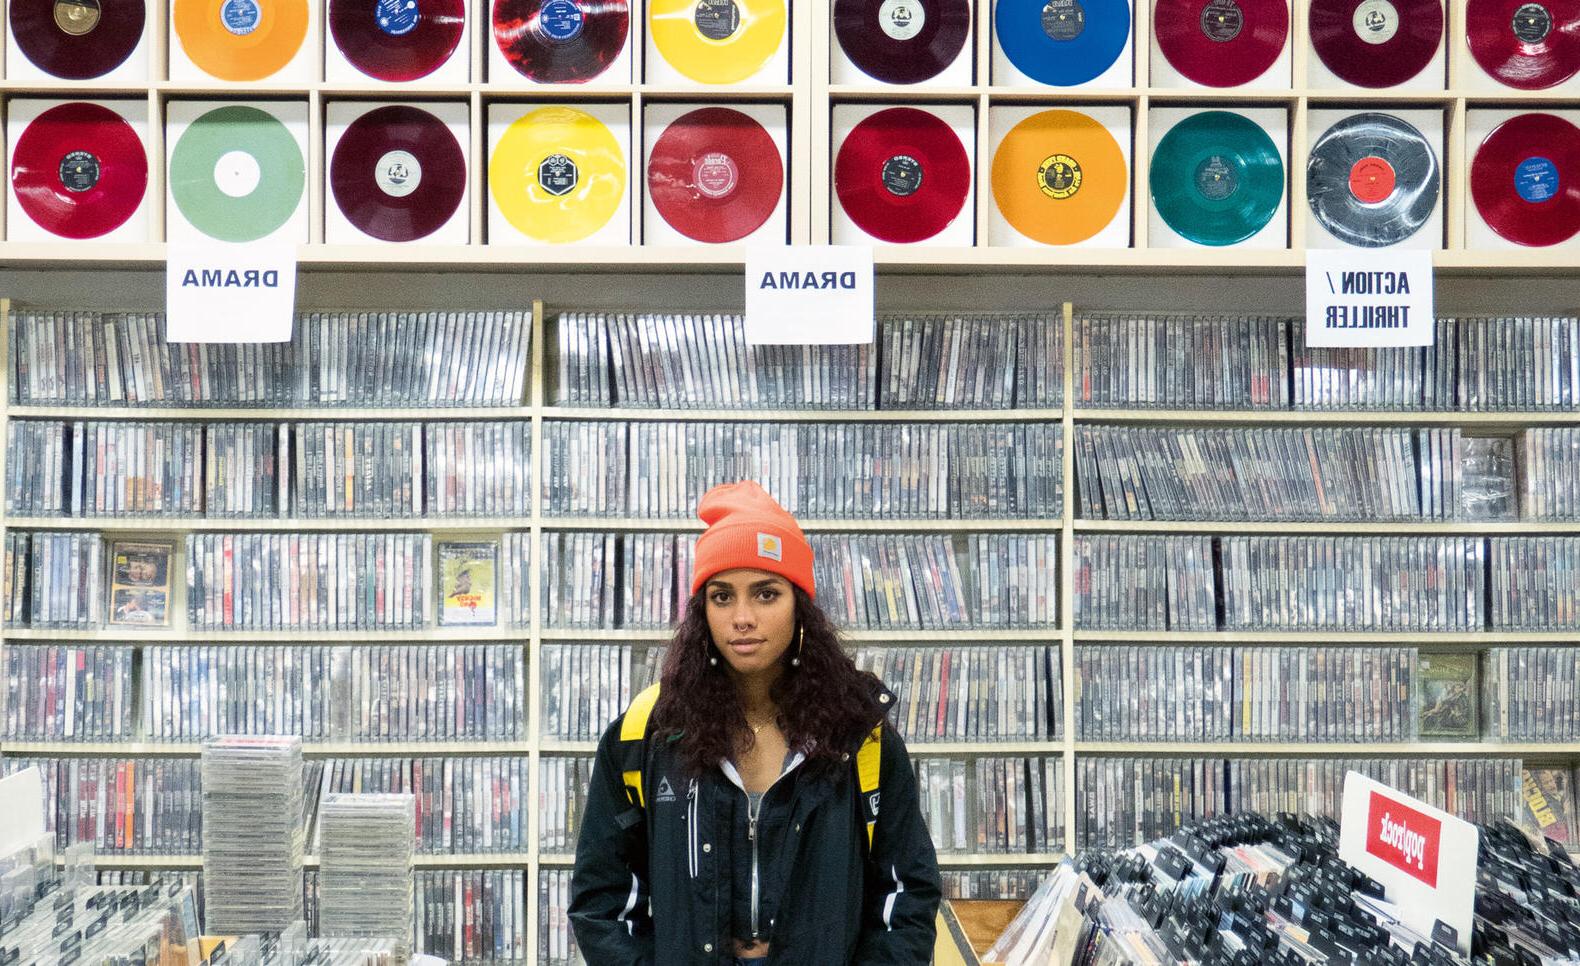 Person standing in a Whittier record store